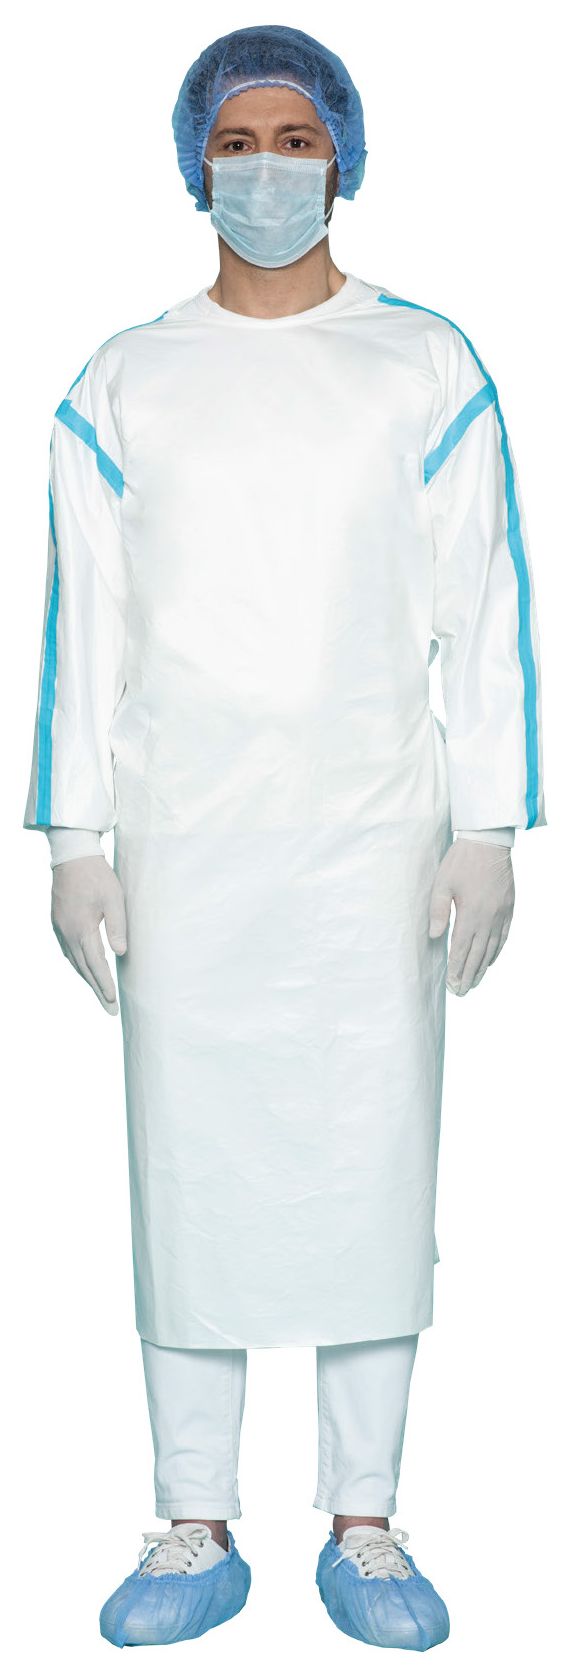 Single Use Protective Gown with Blue Tape